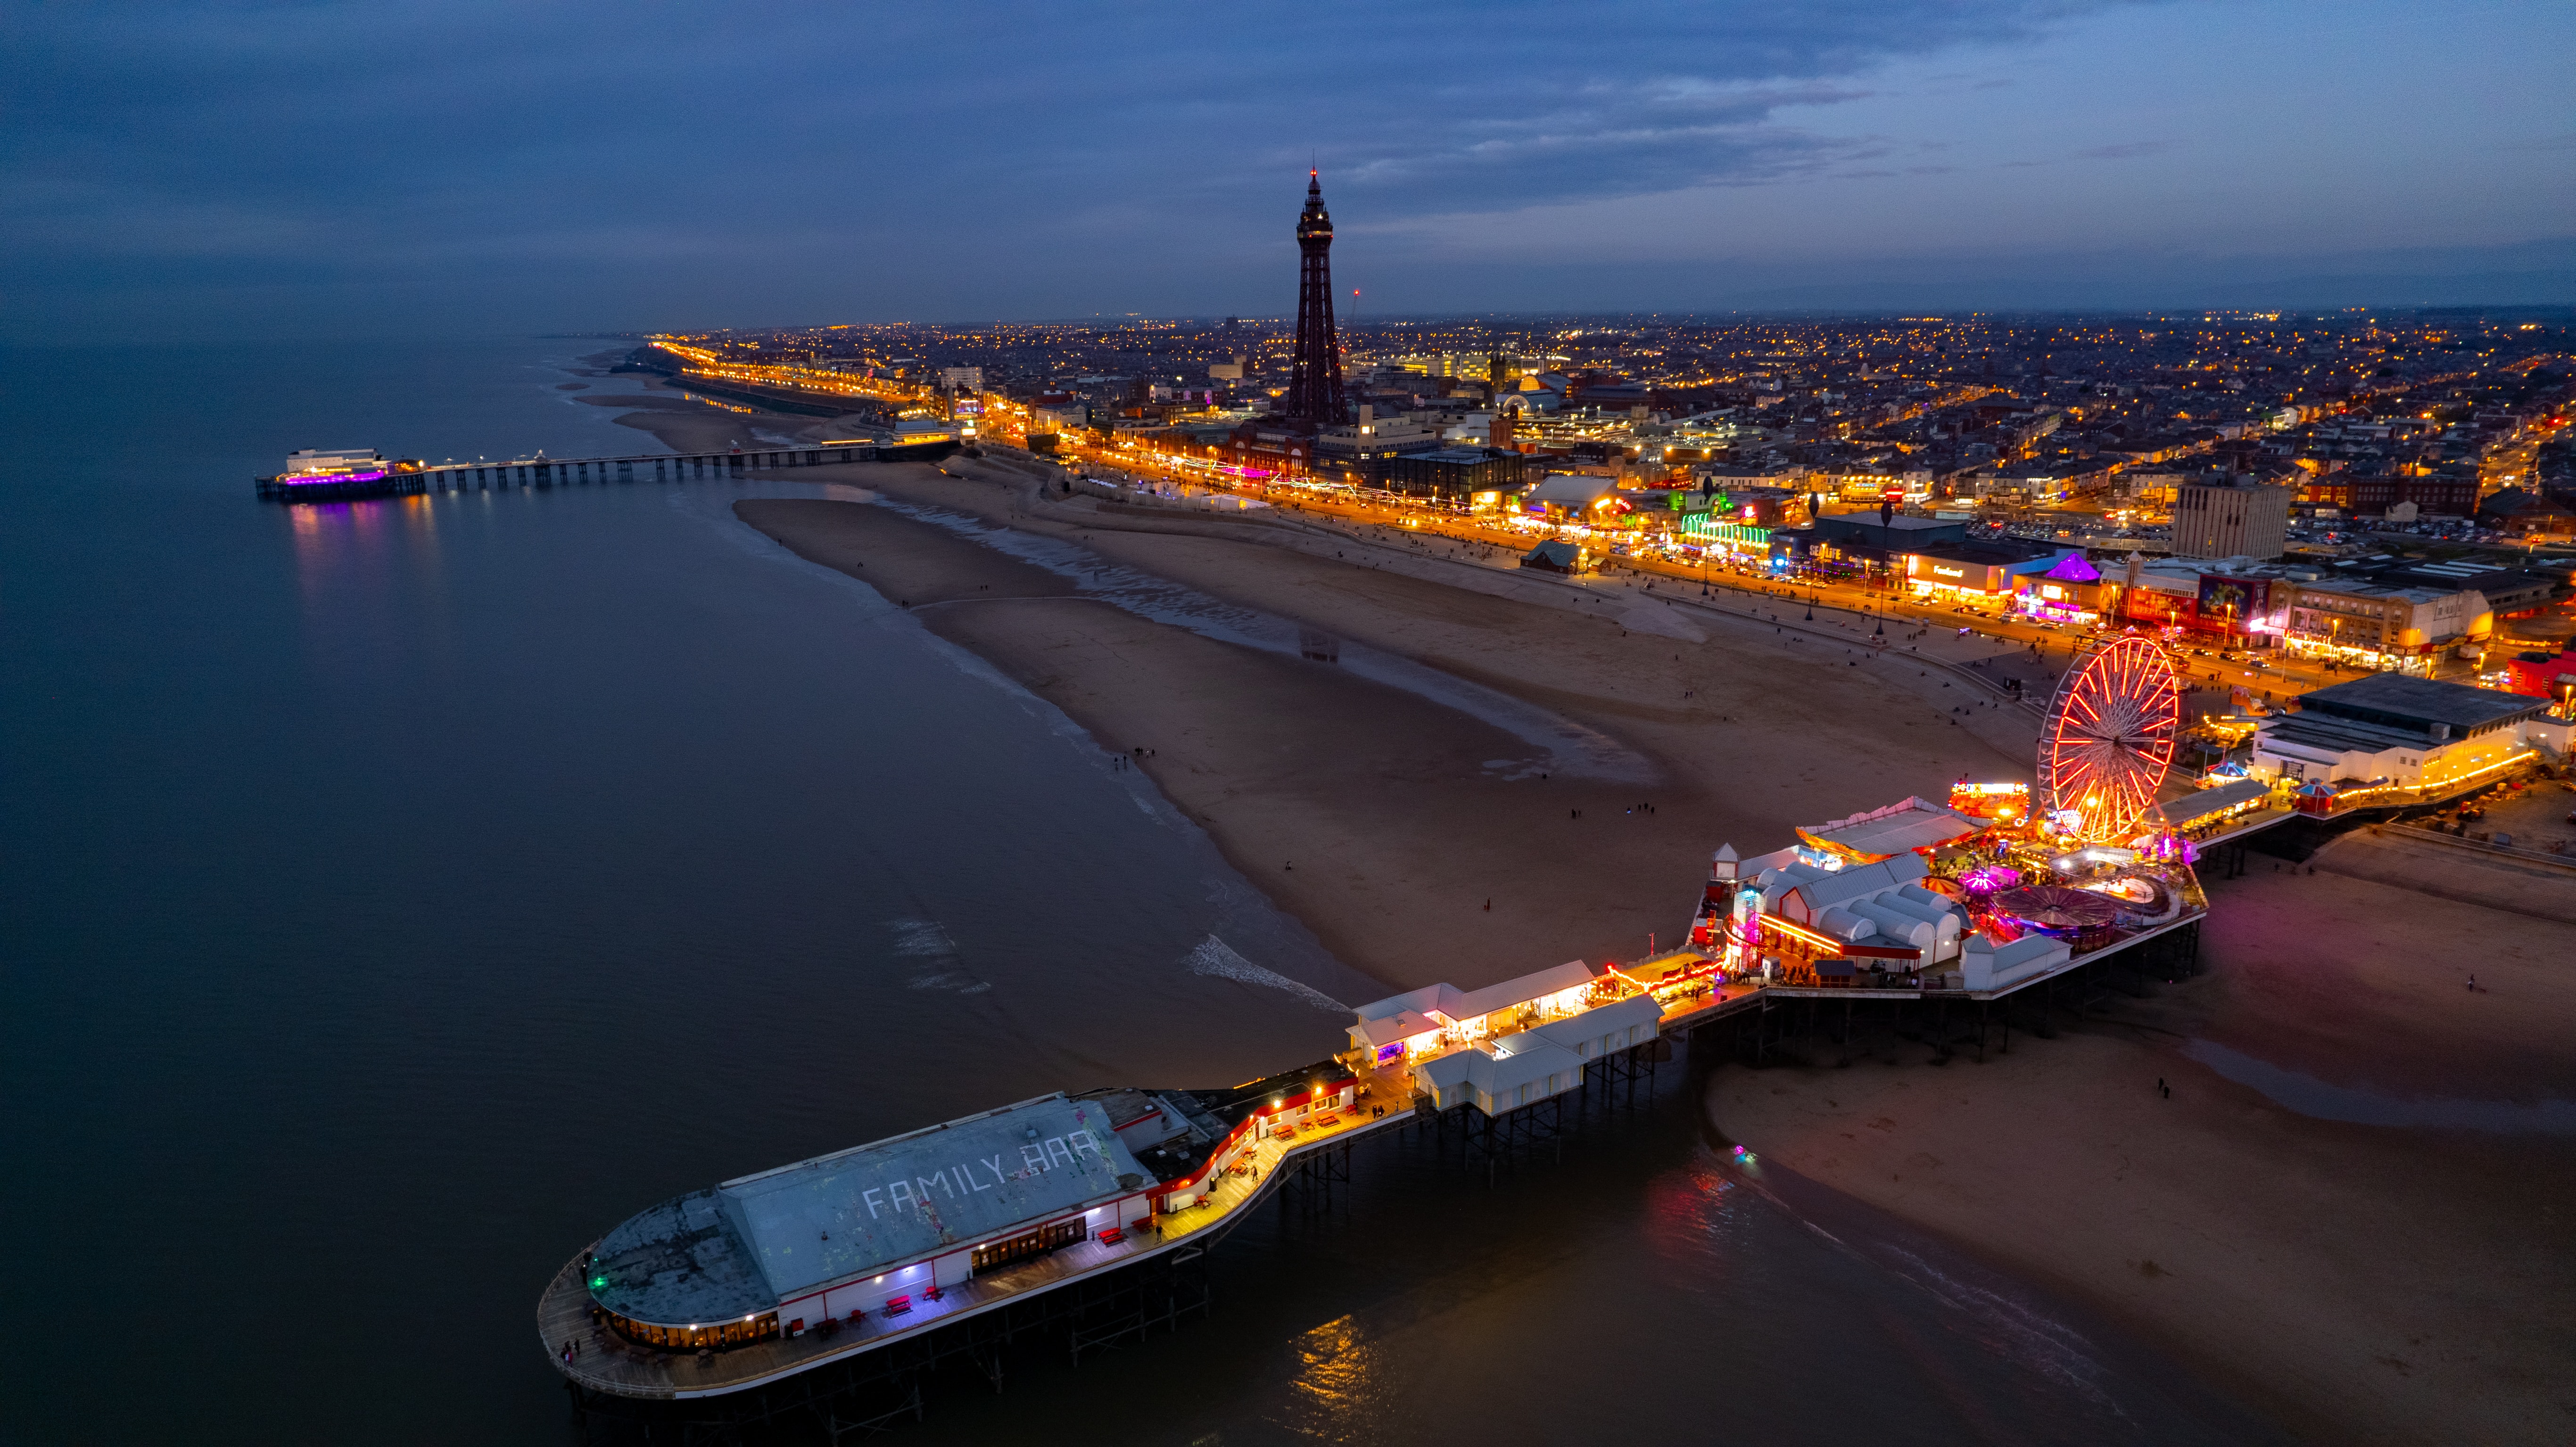 Blackpool at night by Mark McNeill